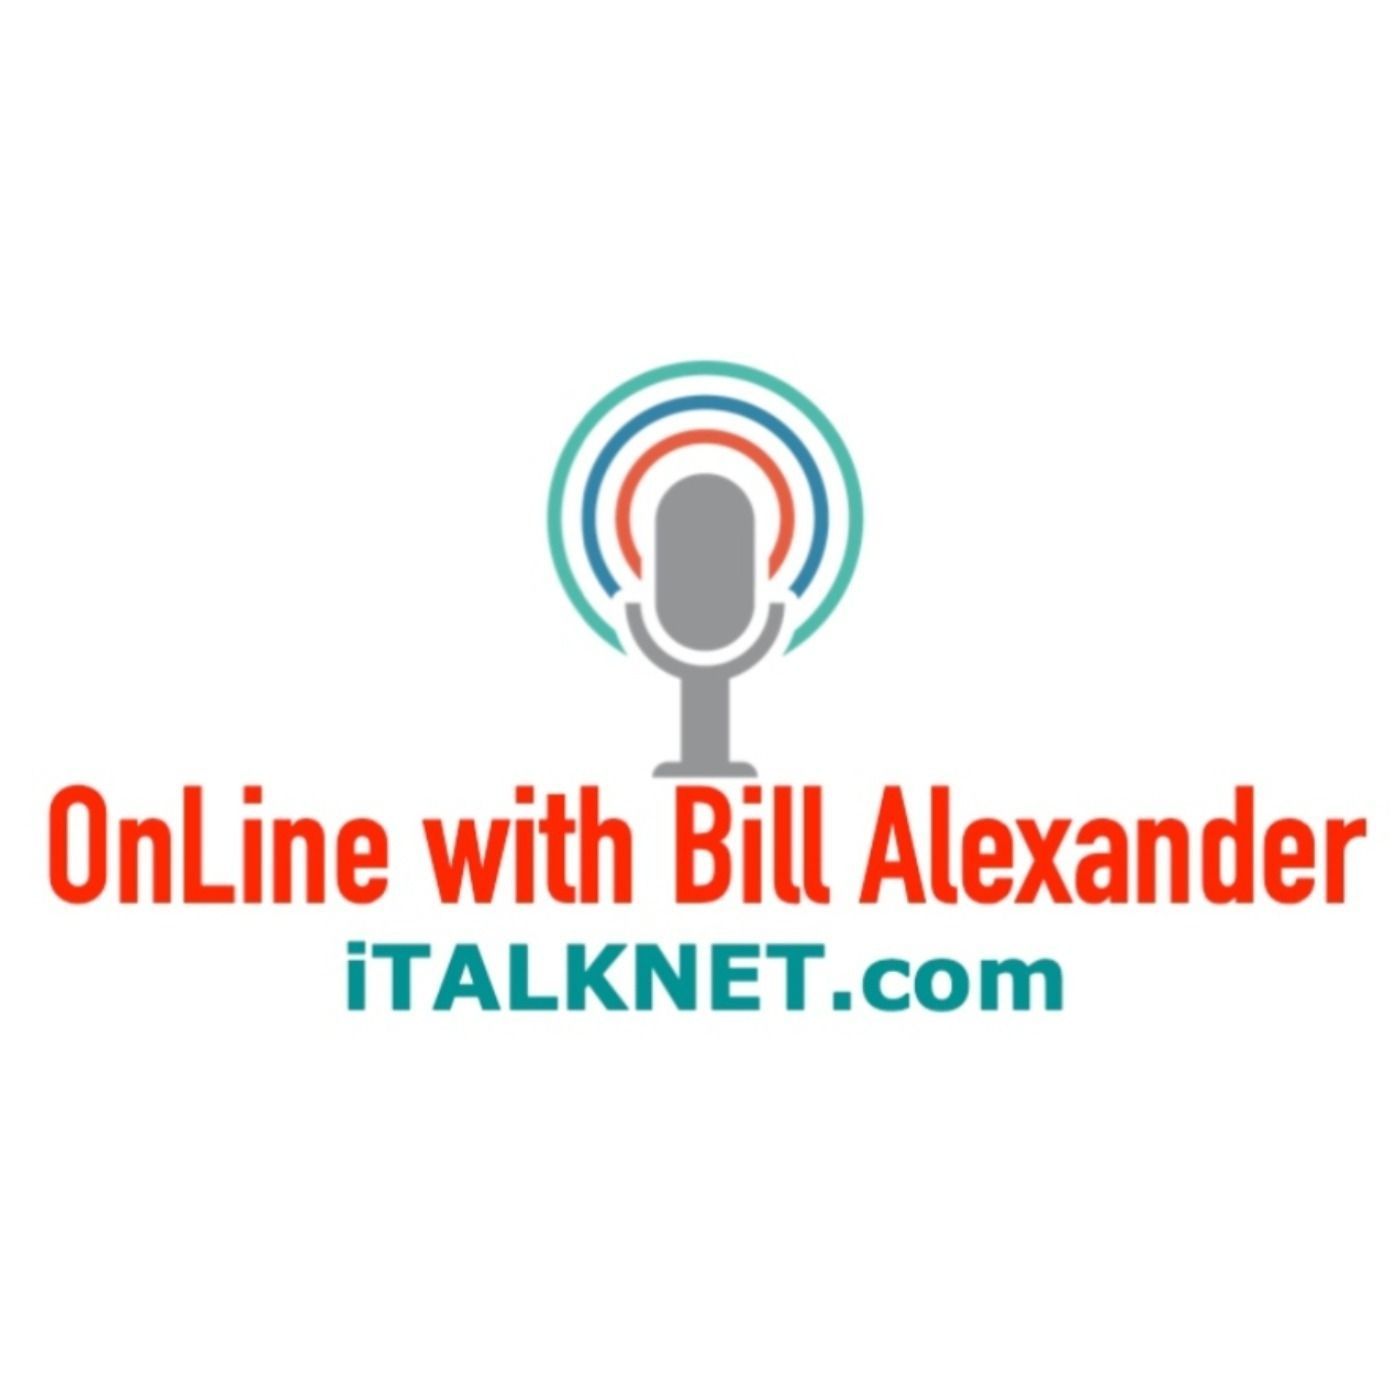 iTALKNET Guest:  Robert William Weber author of "The Essence of Perfection"